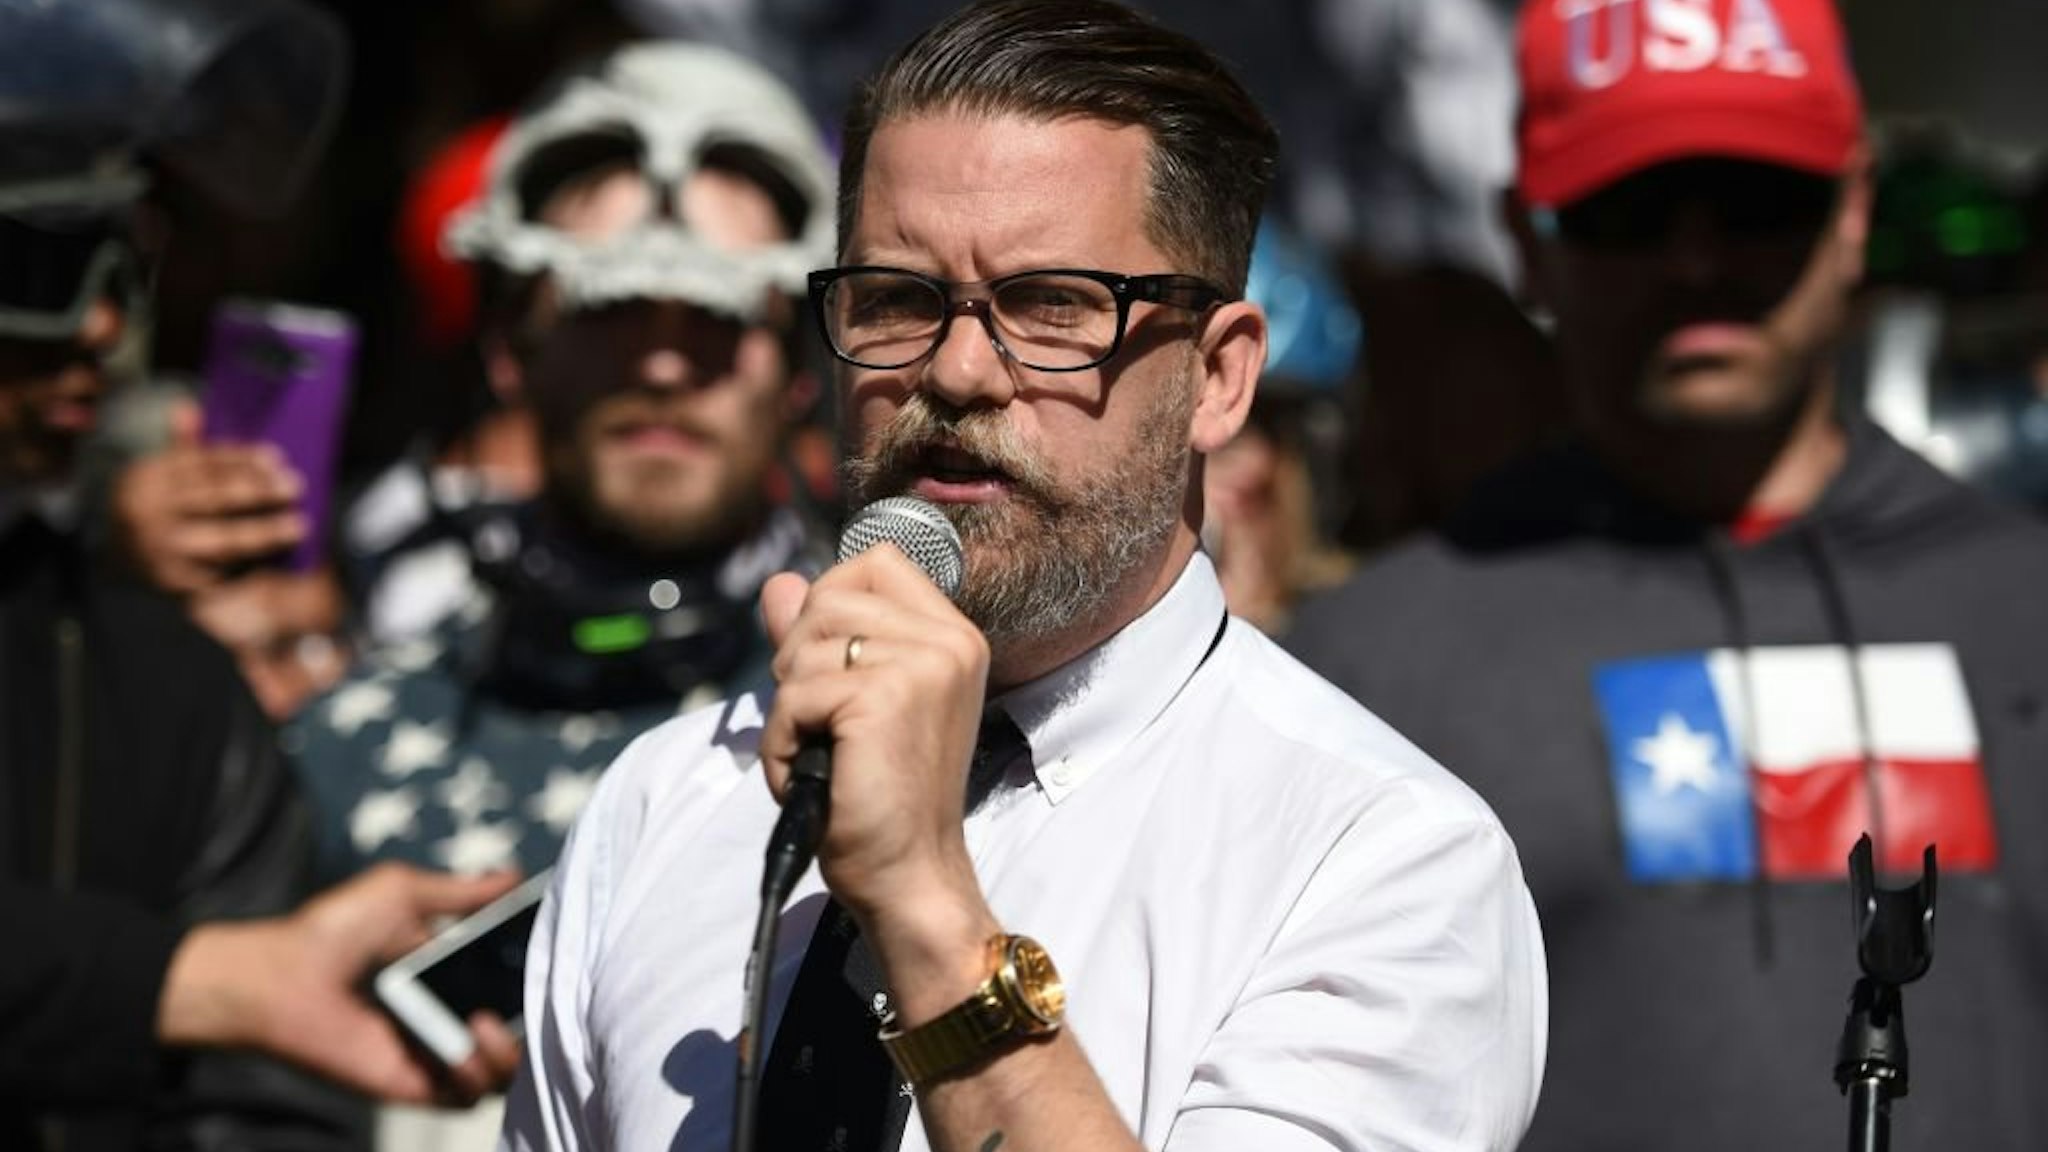 Vice Media co-founder and conservative speaker Gavin McInnes reads a speech written by Ann Coulter to a crowd during a conservative rally in Berkeley, California on April 27, 2017. Conservative firebrand Ann Coulter on April 26, 2017 canceled a planned ap